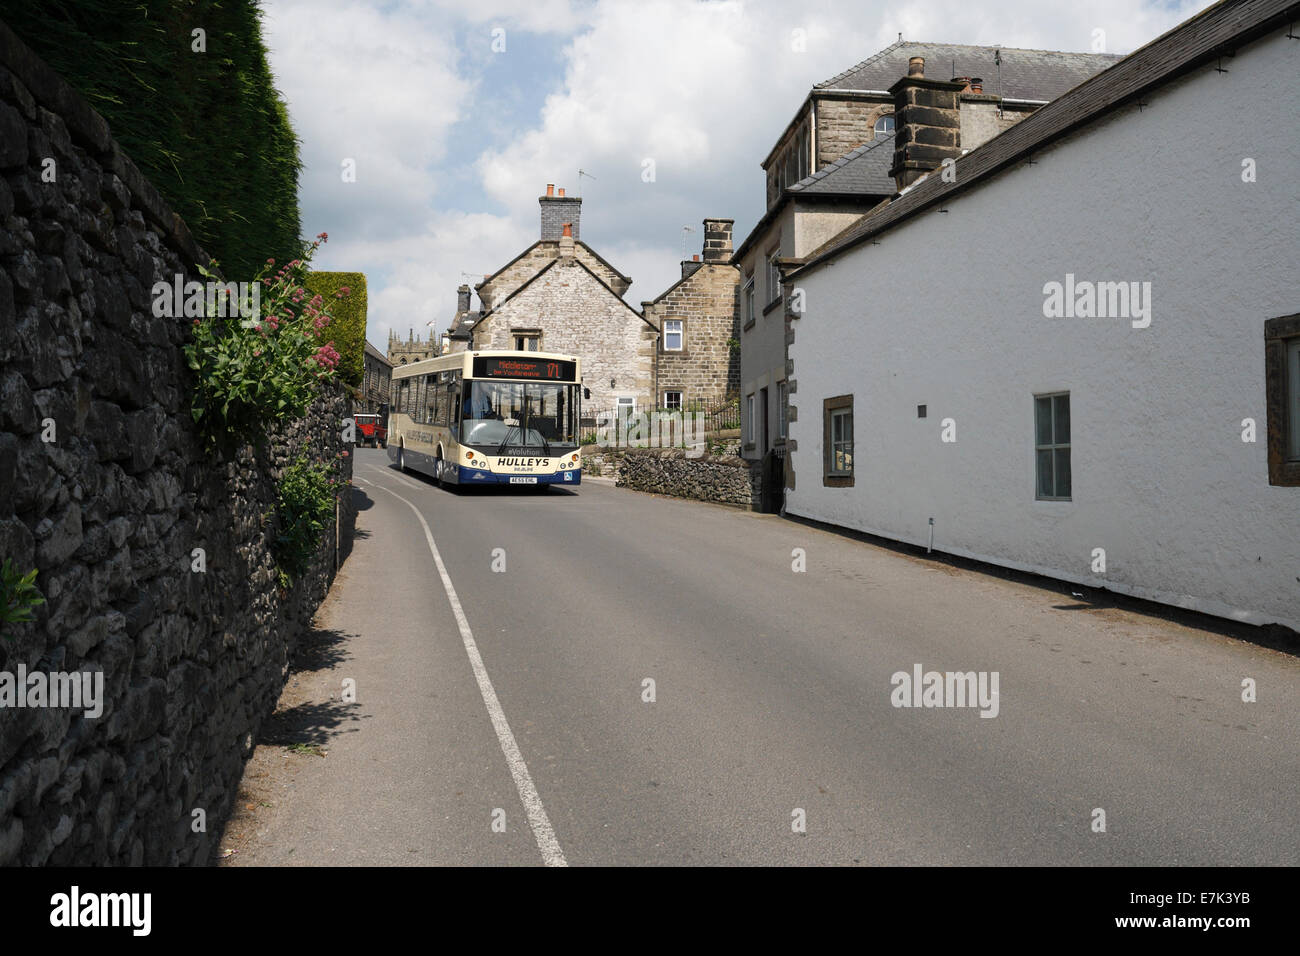 Rural Bus transport in Youlgreave in the Derbyshire Peak district Stock Photo